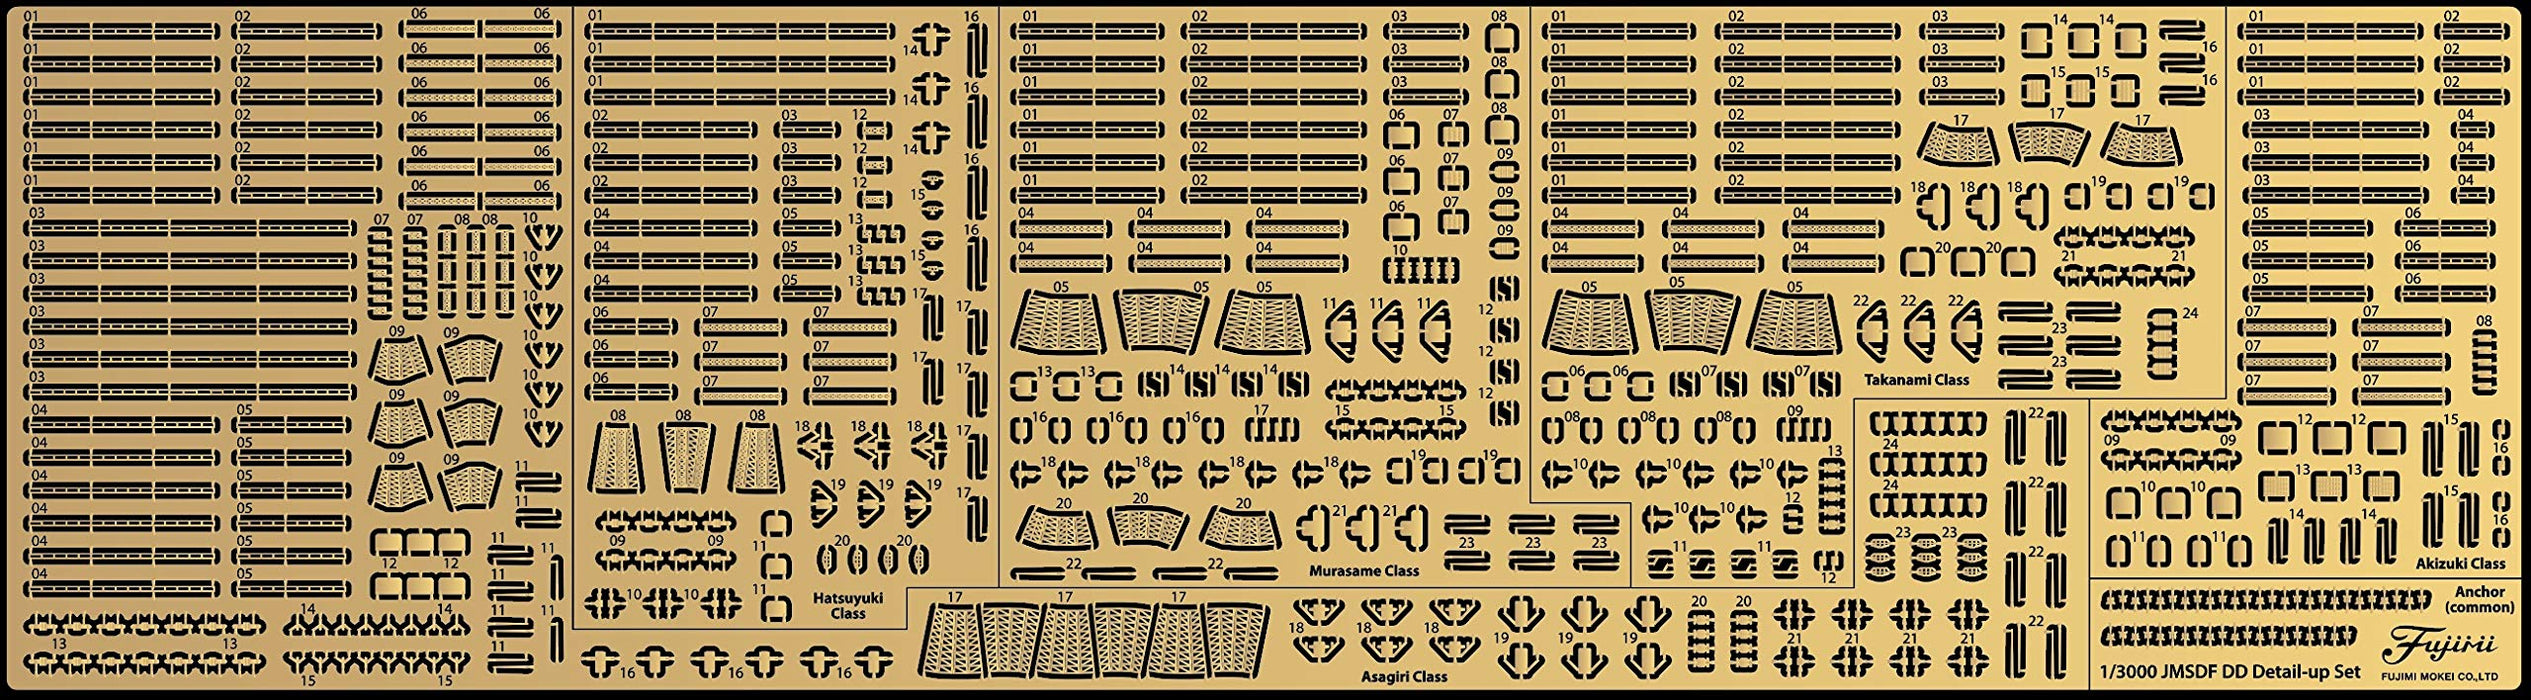 Fujimi Model 1/3000 Detail Up Parts Series No.7 1/3000 Maritime Self-Defense Force Destroyer (Dd Type) Genuine Etching Parts